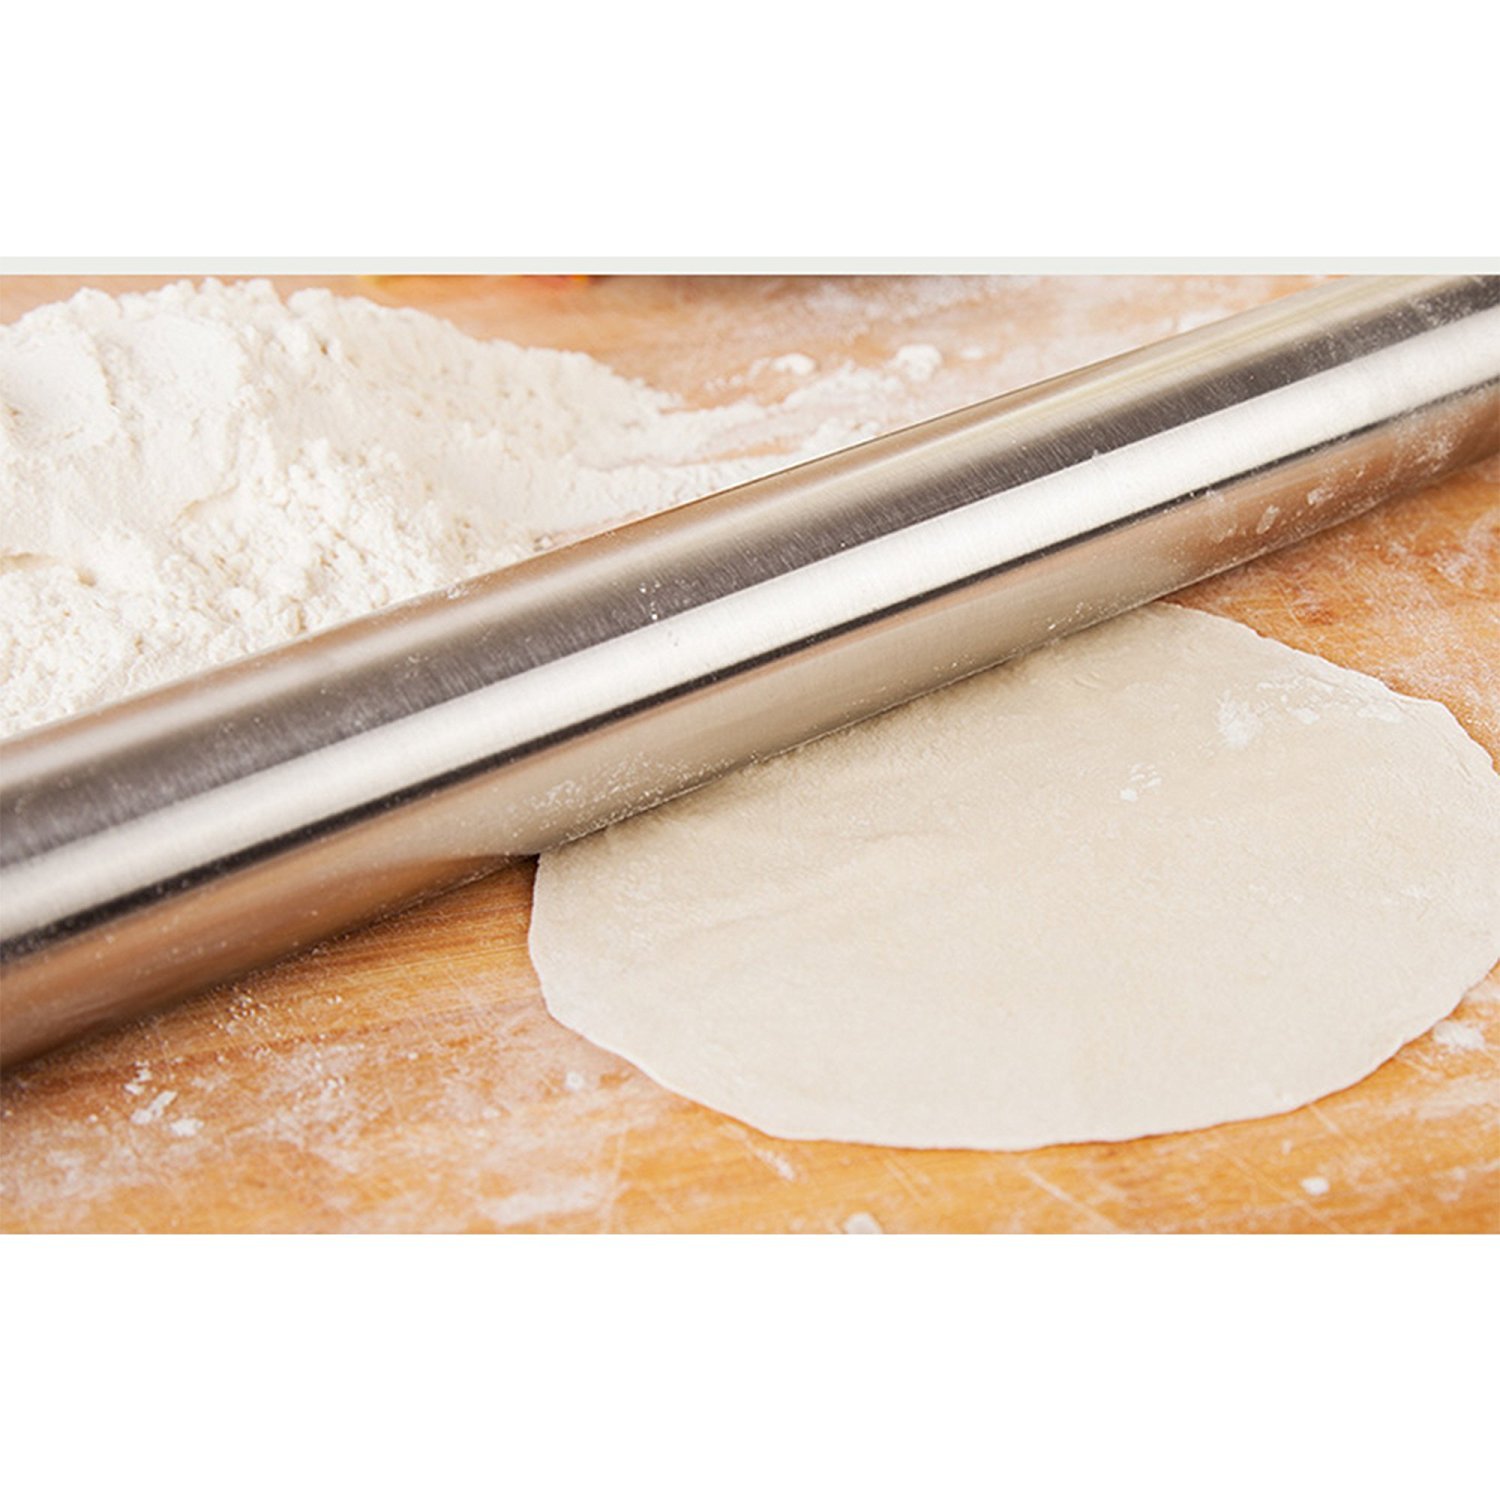 Rolling Pin for Baking